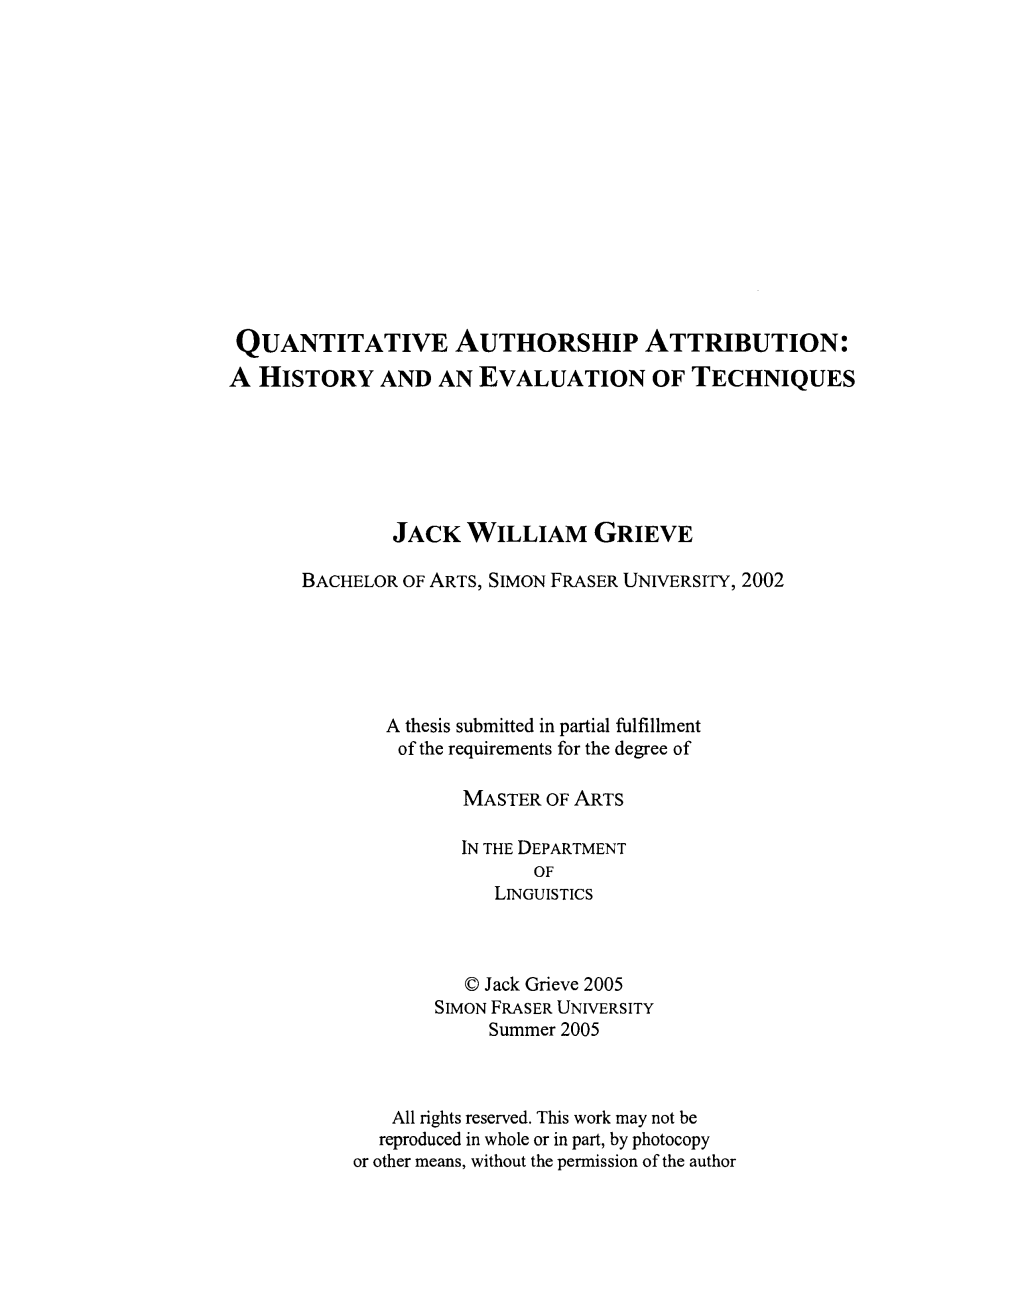 Quantitative Authorship Attribution: a History and an Evaluation of Techniques